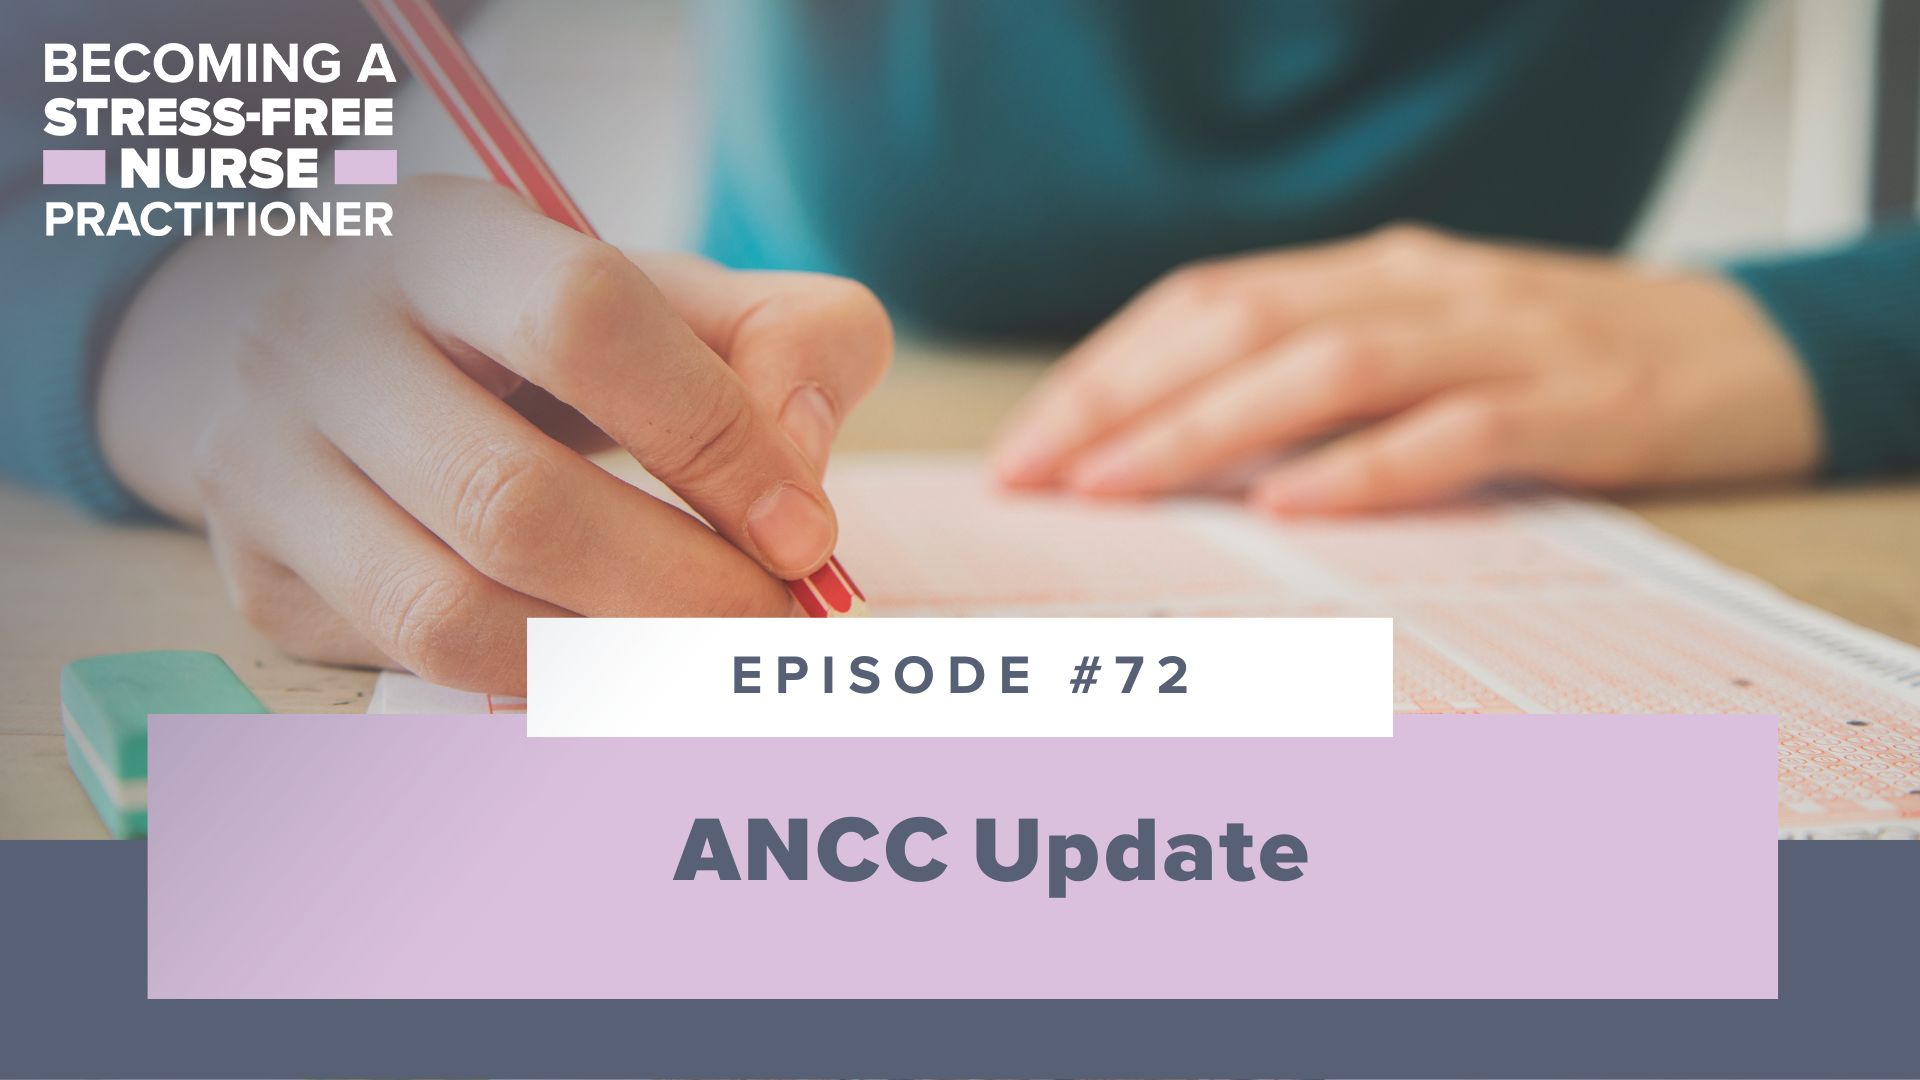 SMNP Blog - Ep #72: ANCC Update [NP STUDENT]